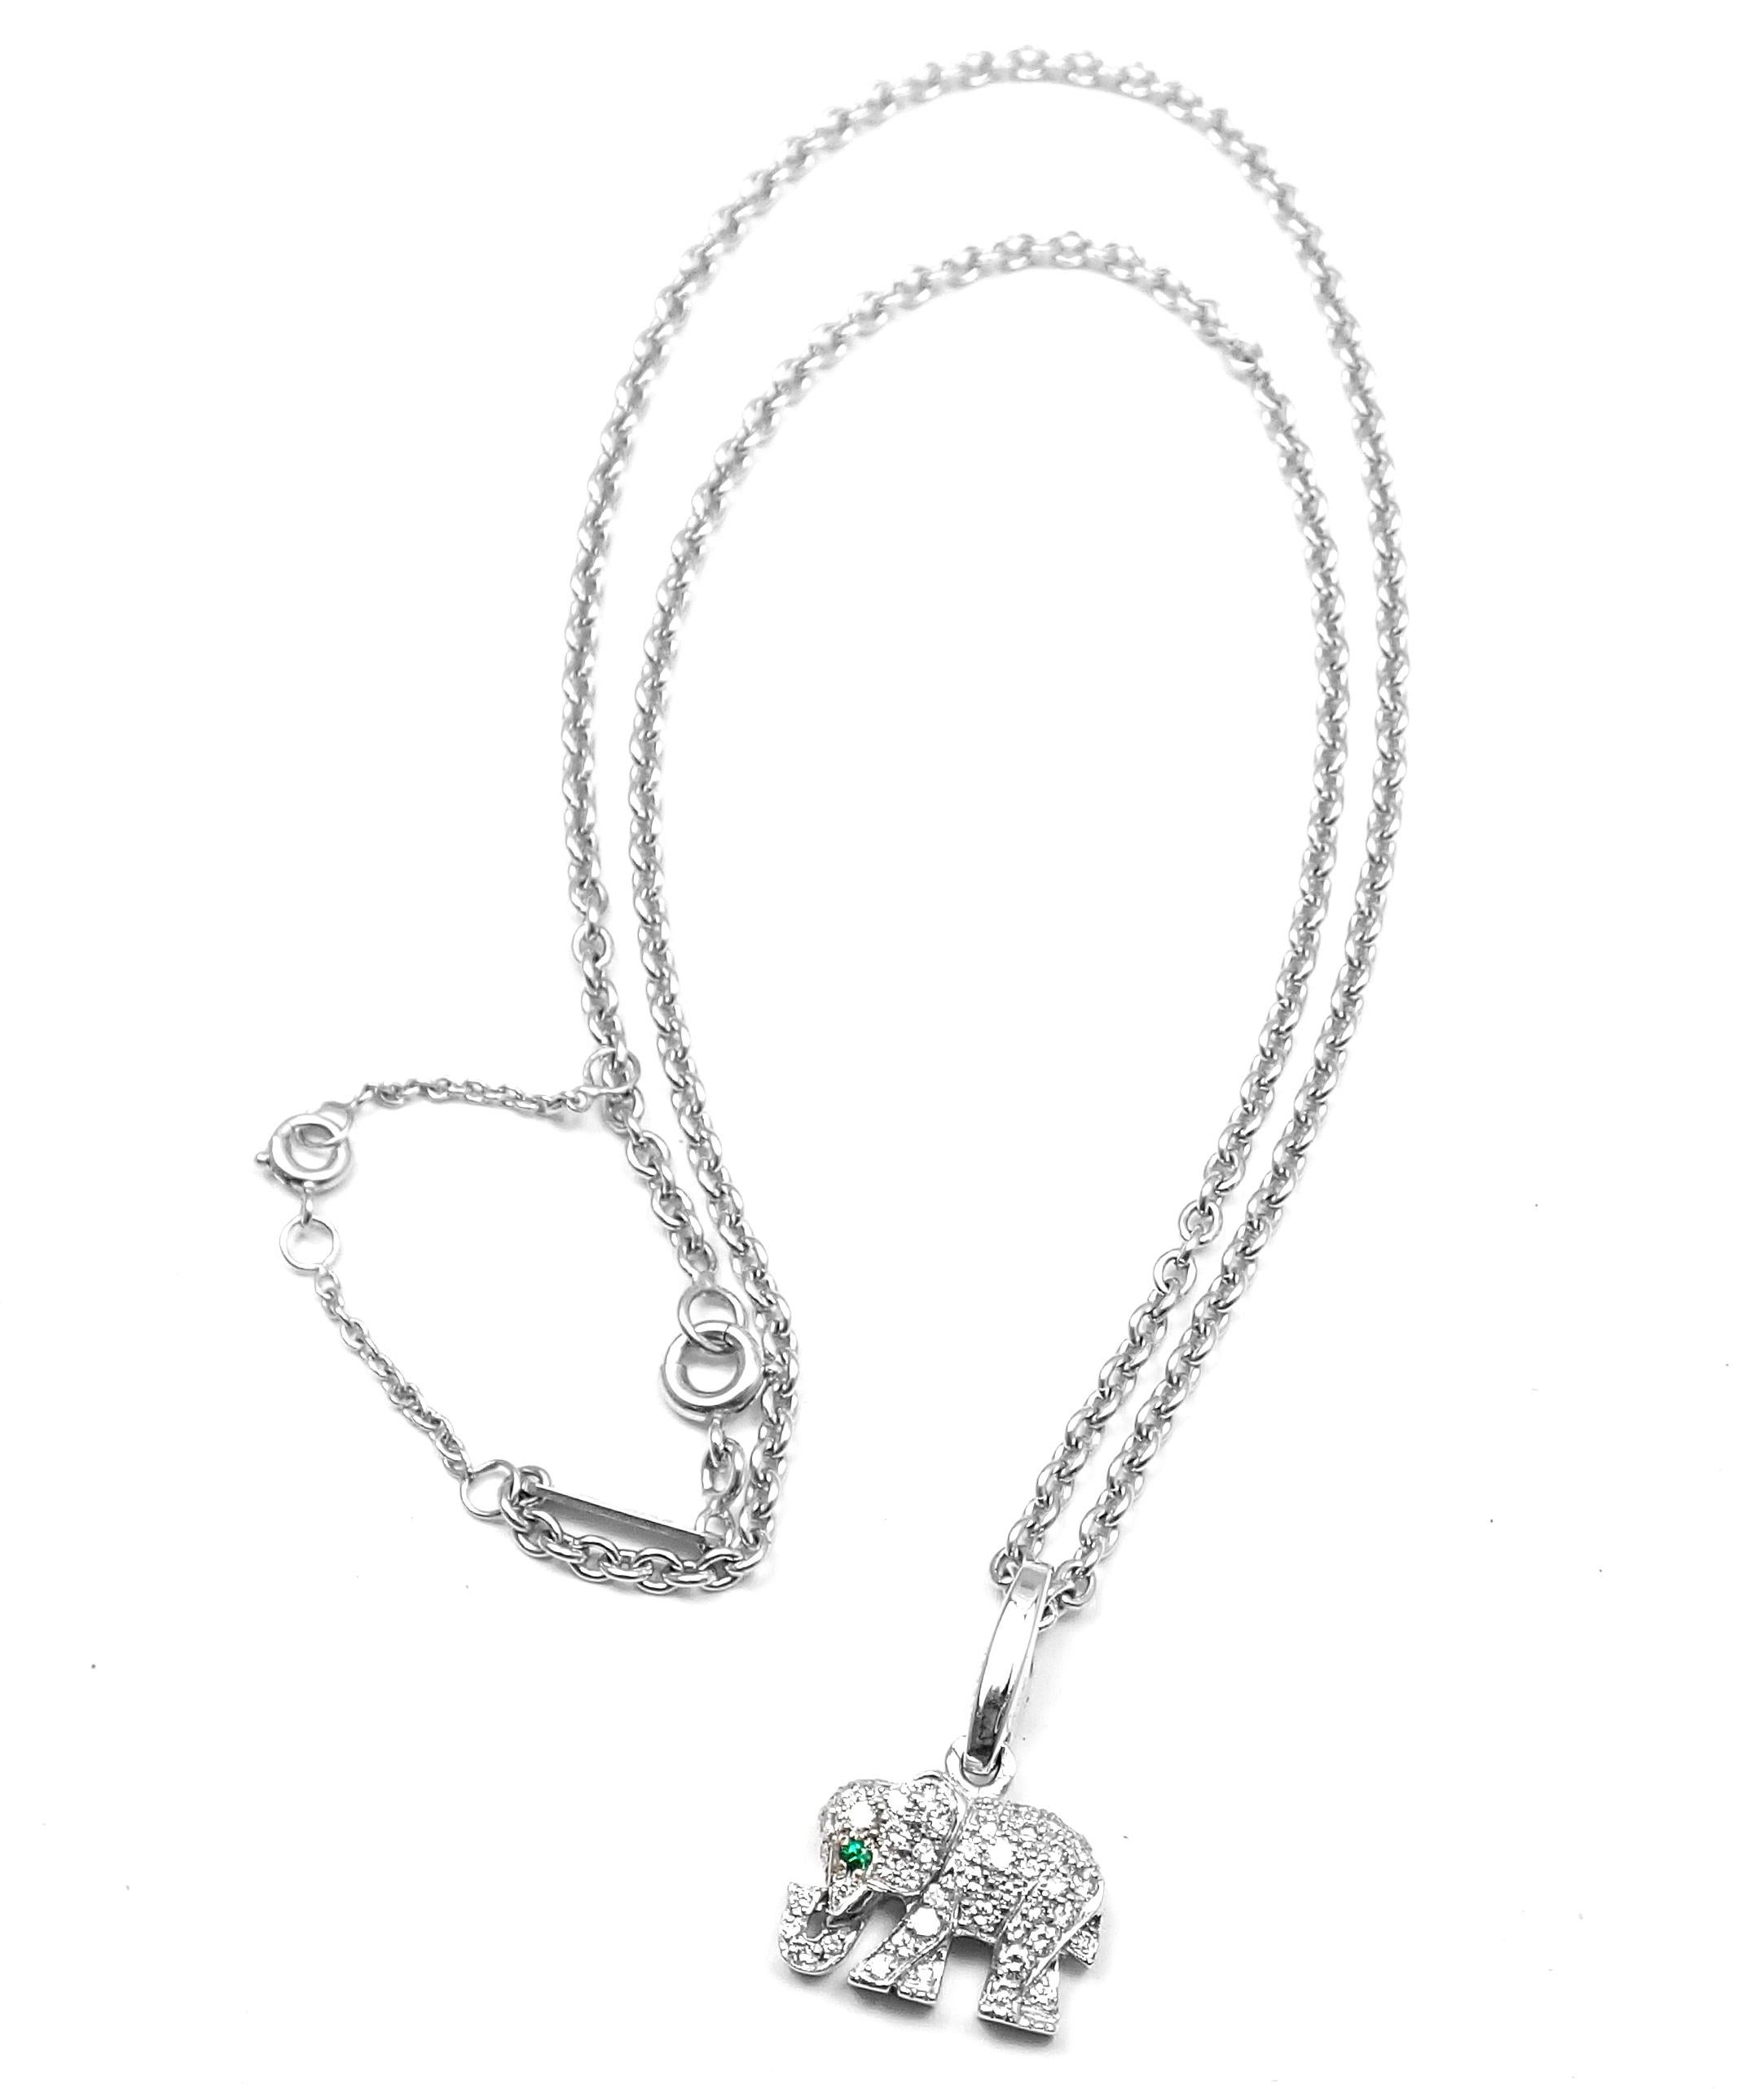 18k White Gold Diamond & Emerald Elephant Pendant Necklace by Cartier. 
With round brilliant cut diamonds, VS1 clarity, G color. Total Diamond Weight: .60ct. One round emerald stone. 
Details: 
Chain Length: 16.5